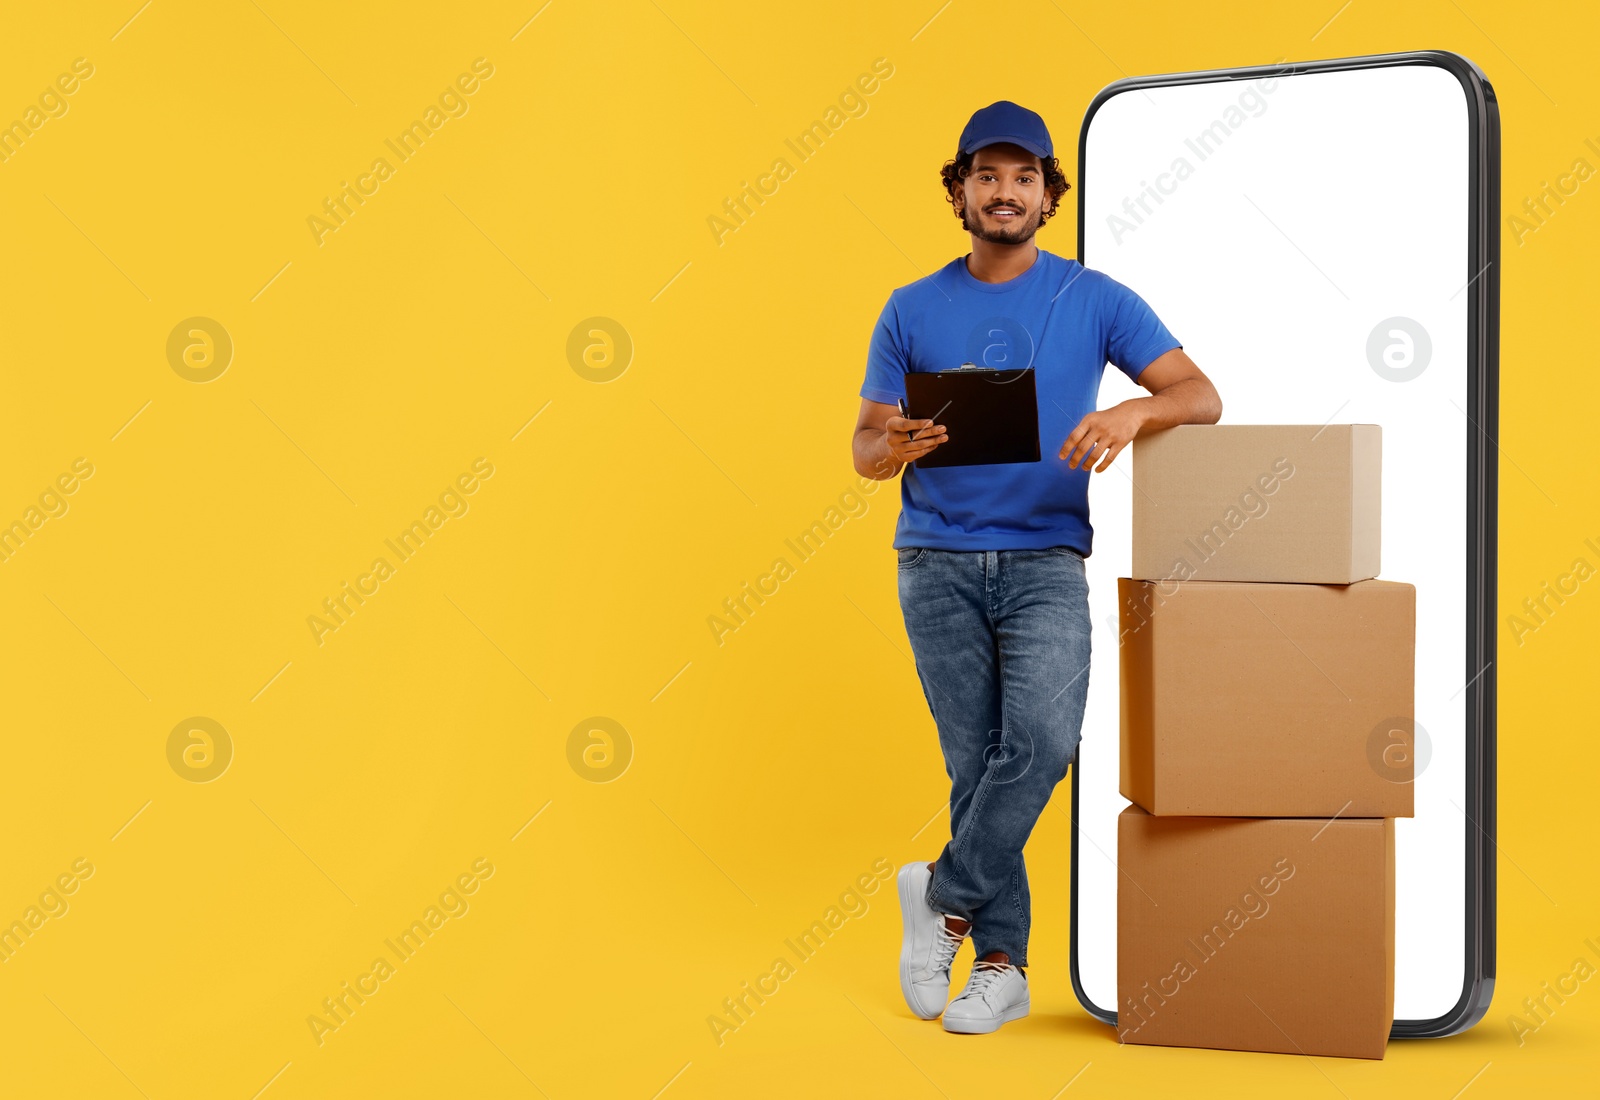 Image of Courier with stack of parcels and clipboard near huge smartphone on golden background. Delivery service. Space for text